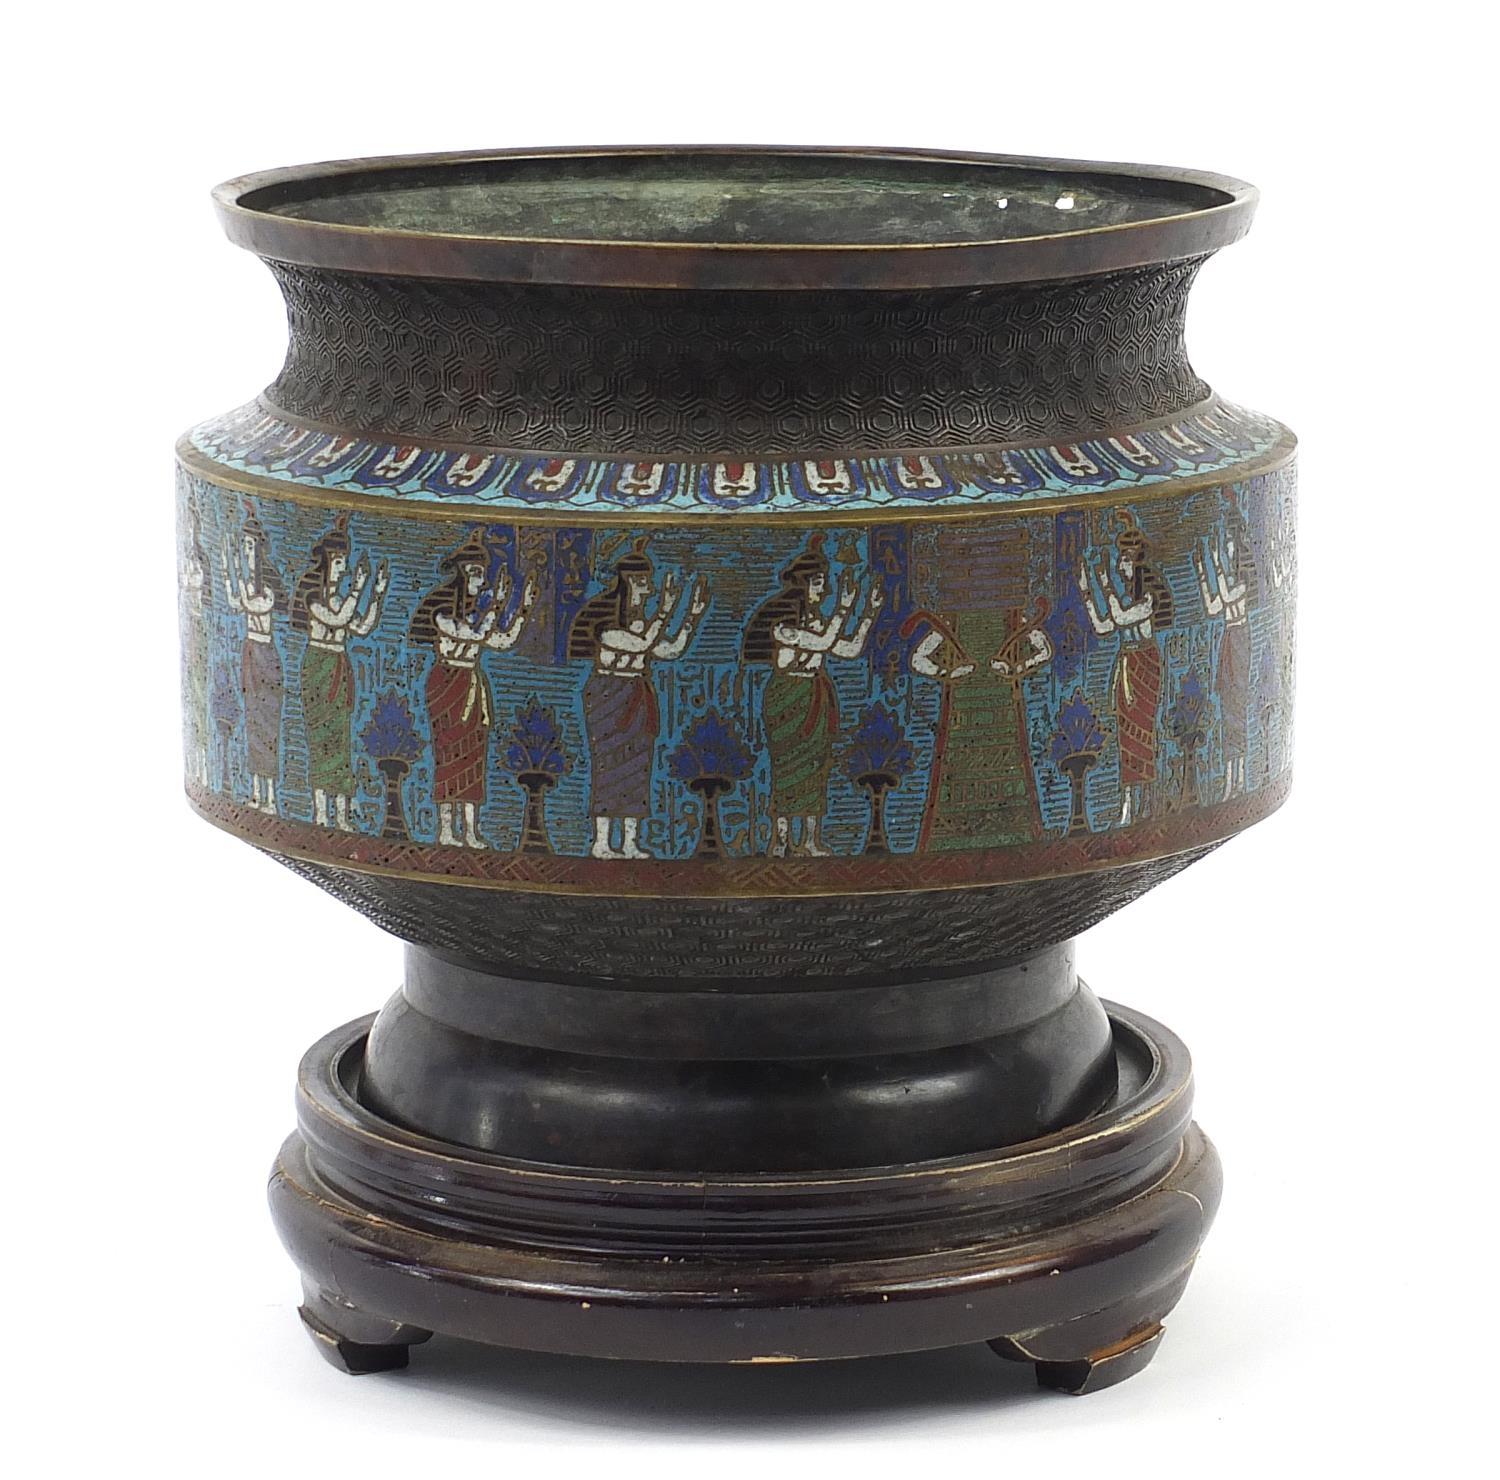 Large Chinese Egyptian revival cloisonné planter on carved hardwood stand, overall 30.5cm high x